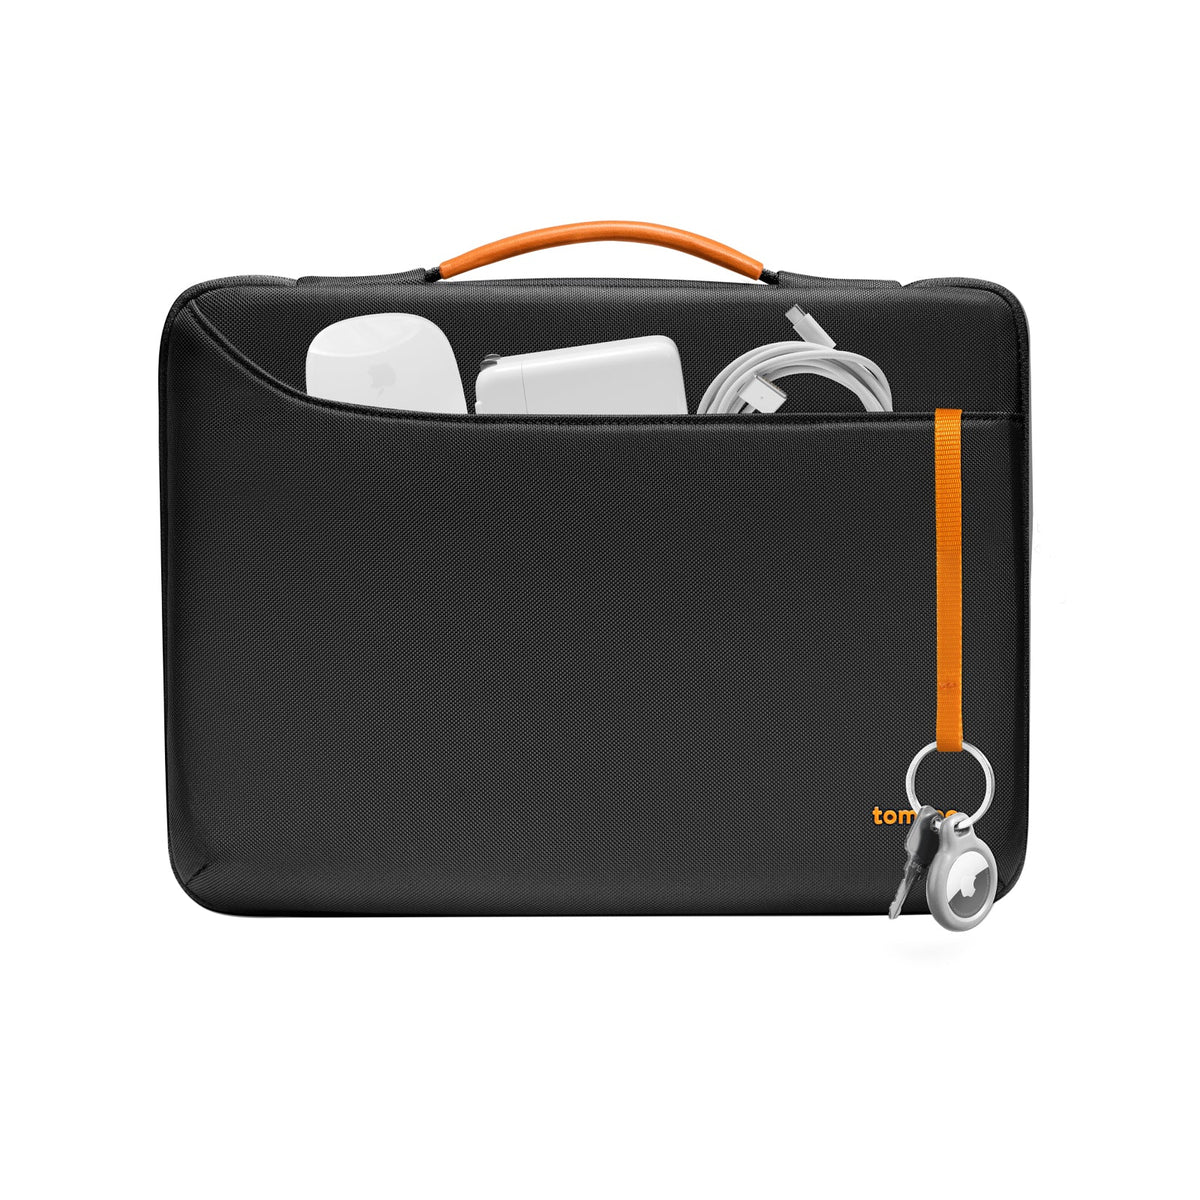 secondary_Defender-A22 Laptop Briefcase For 14-inch MacBook Pro